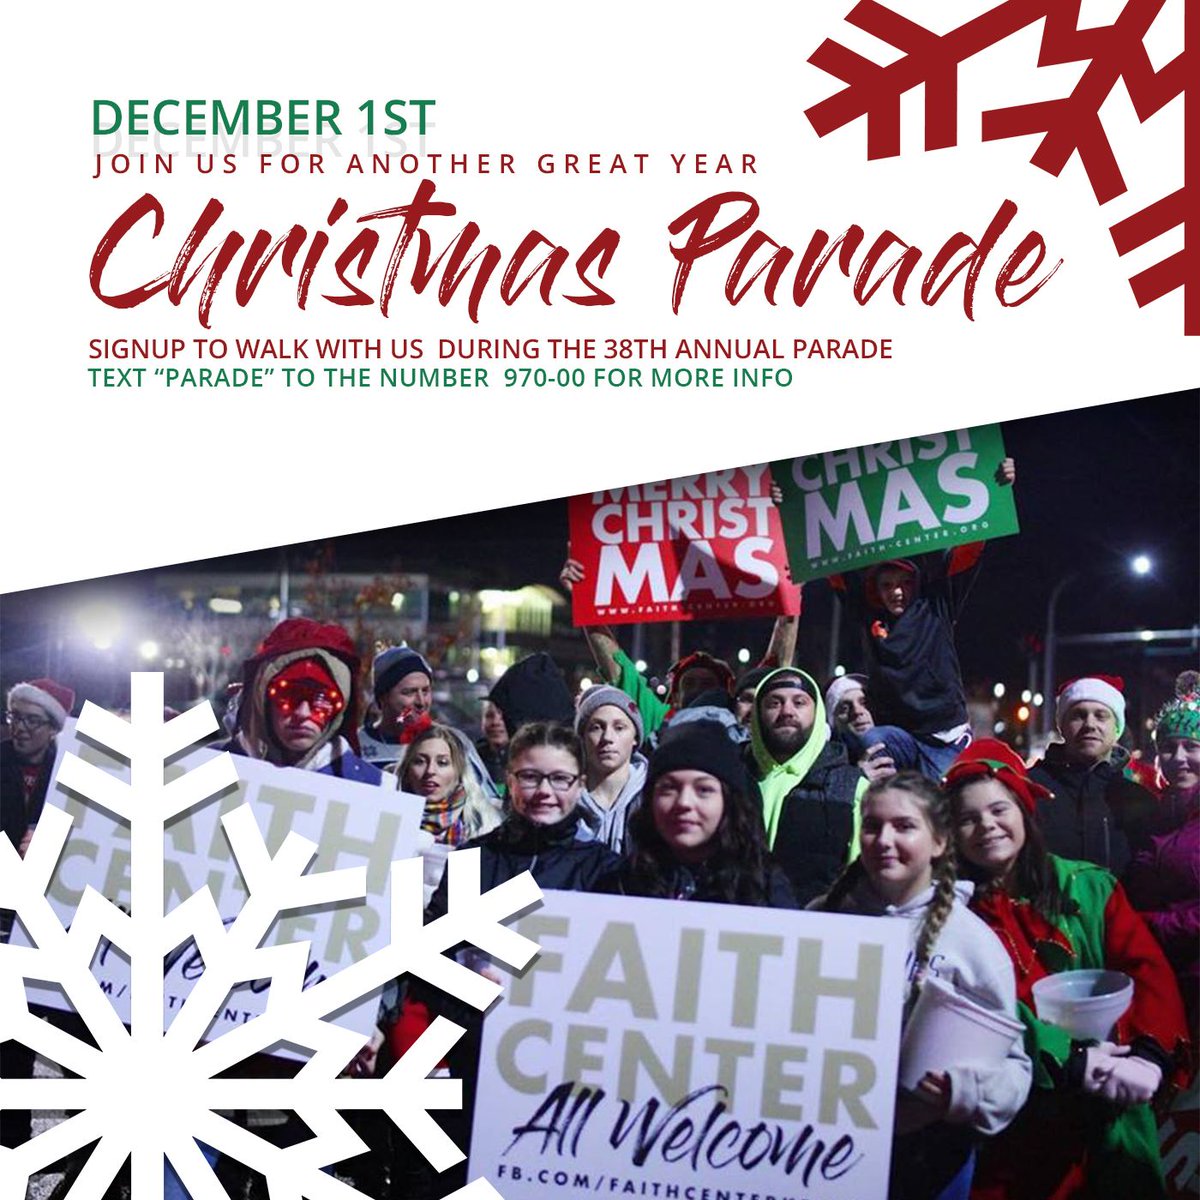 Text the word 'Parade' to the number '970-00' to let us know you're coming! 
#merrychristmas #kelsowa #longviewwa #faithcenter #christmasparade #christmas